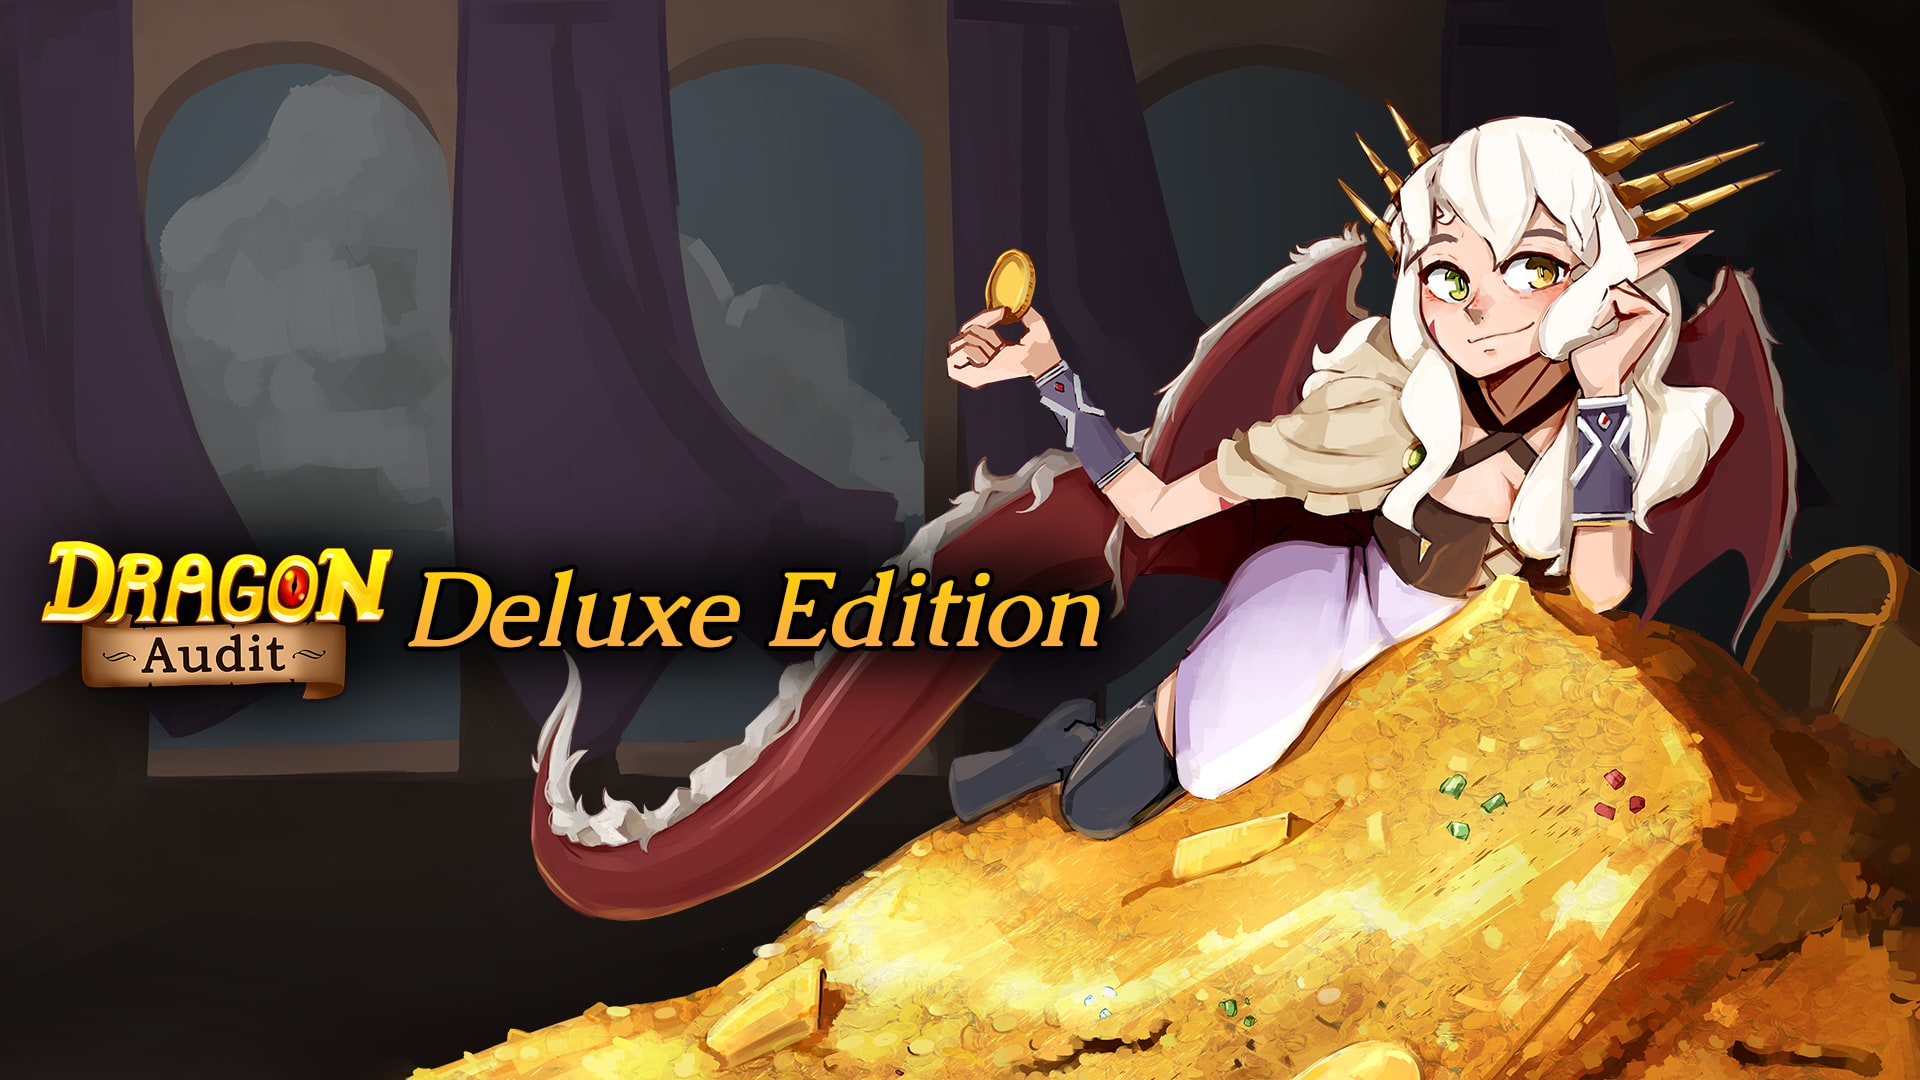 Dragon Audit - Deluxe Edition